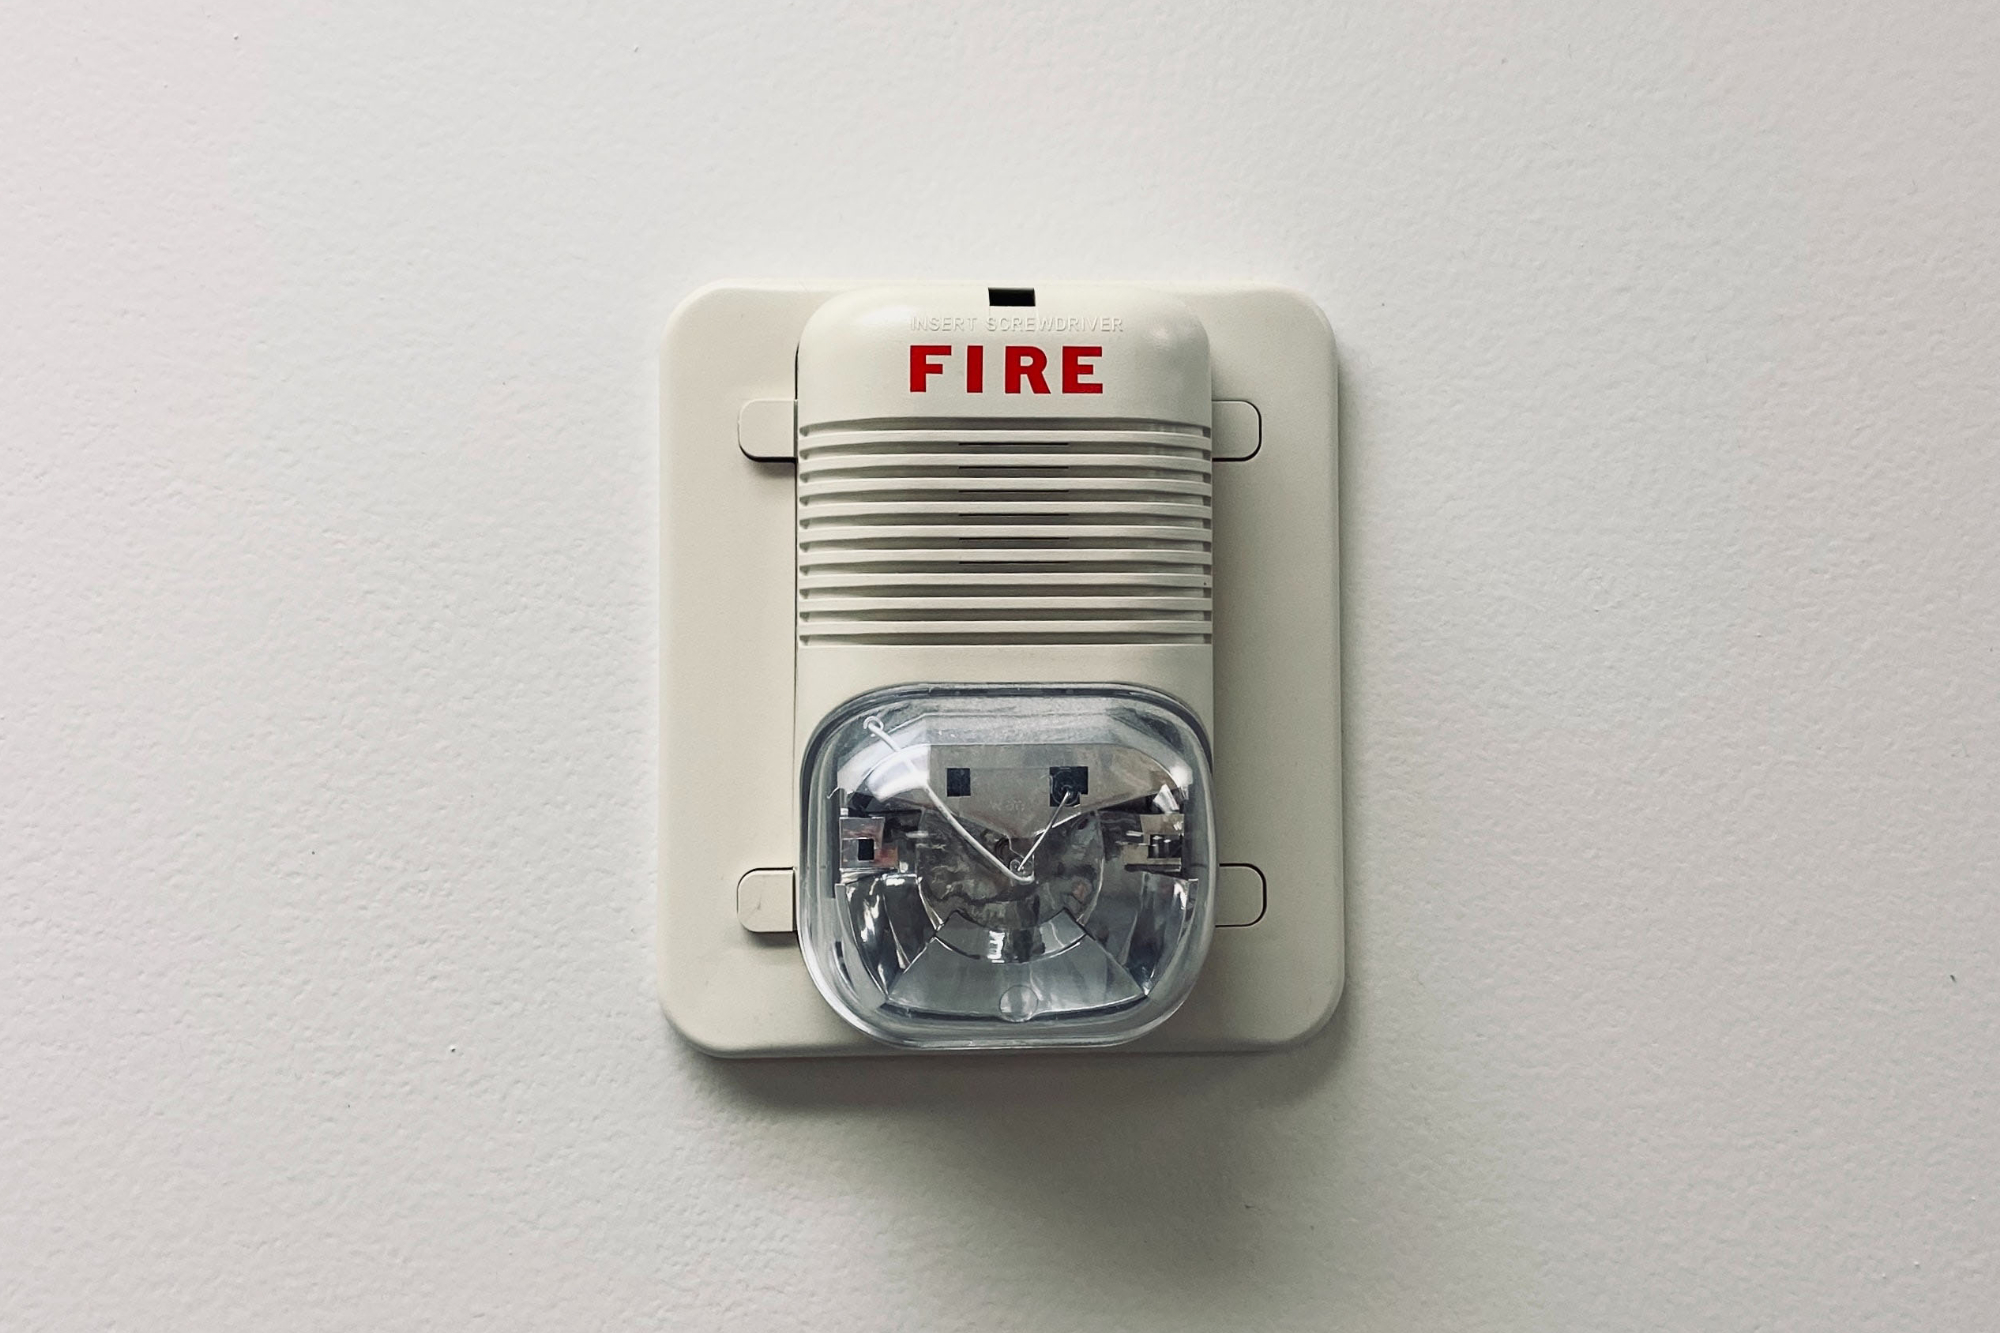 False fire alarms can cause a lot of disruption in homes and businesses alike. Click to read more about common causes of false fire alarms.